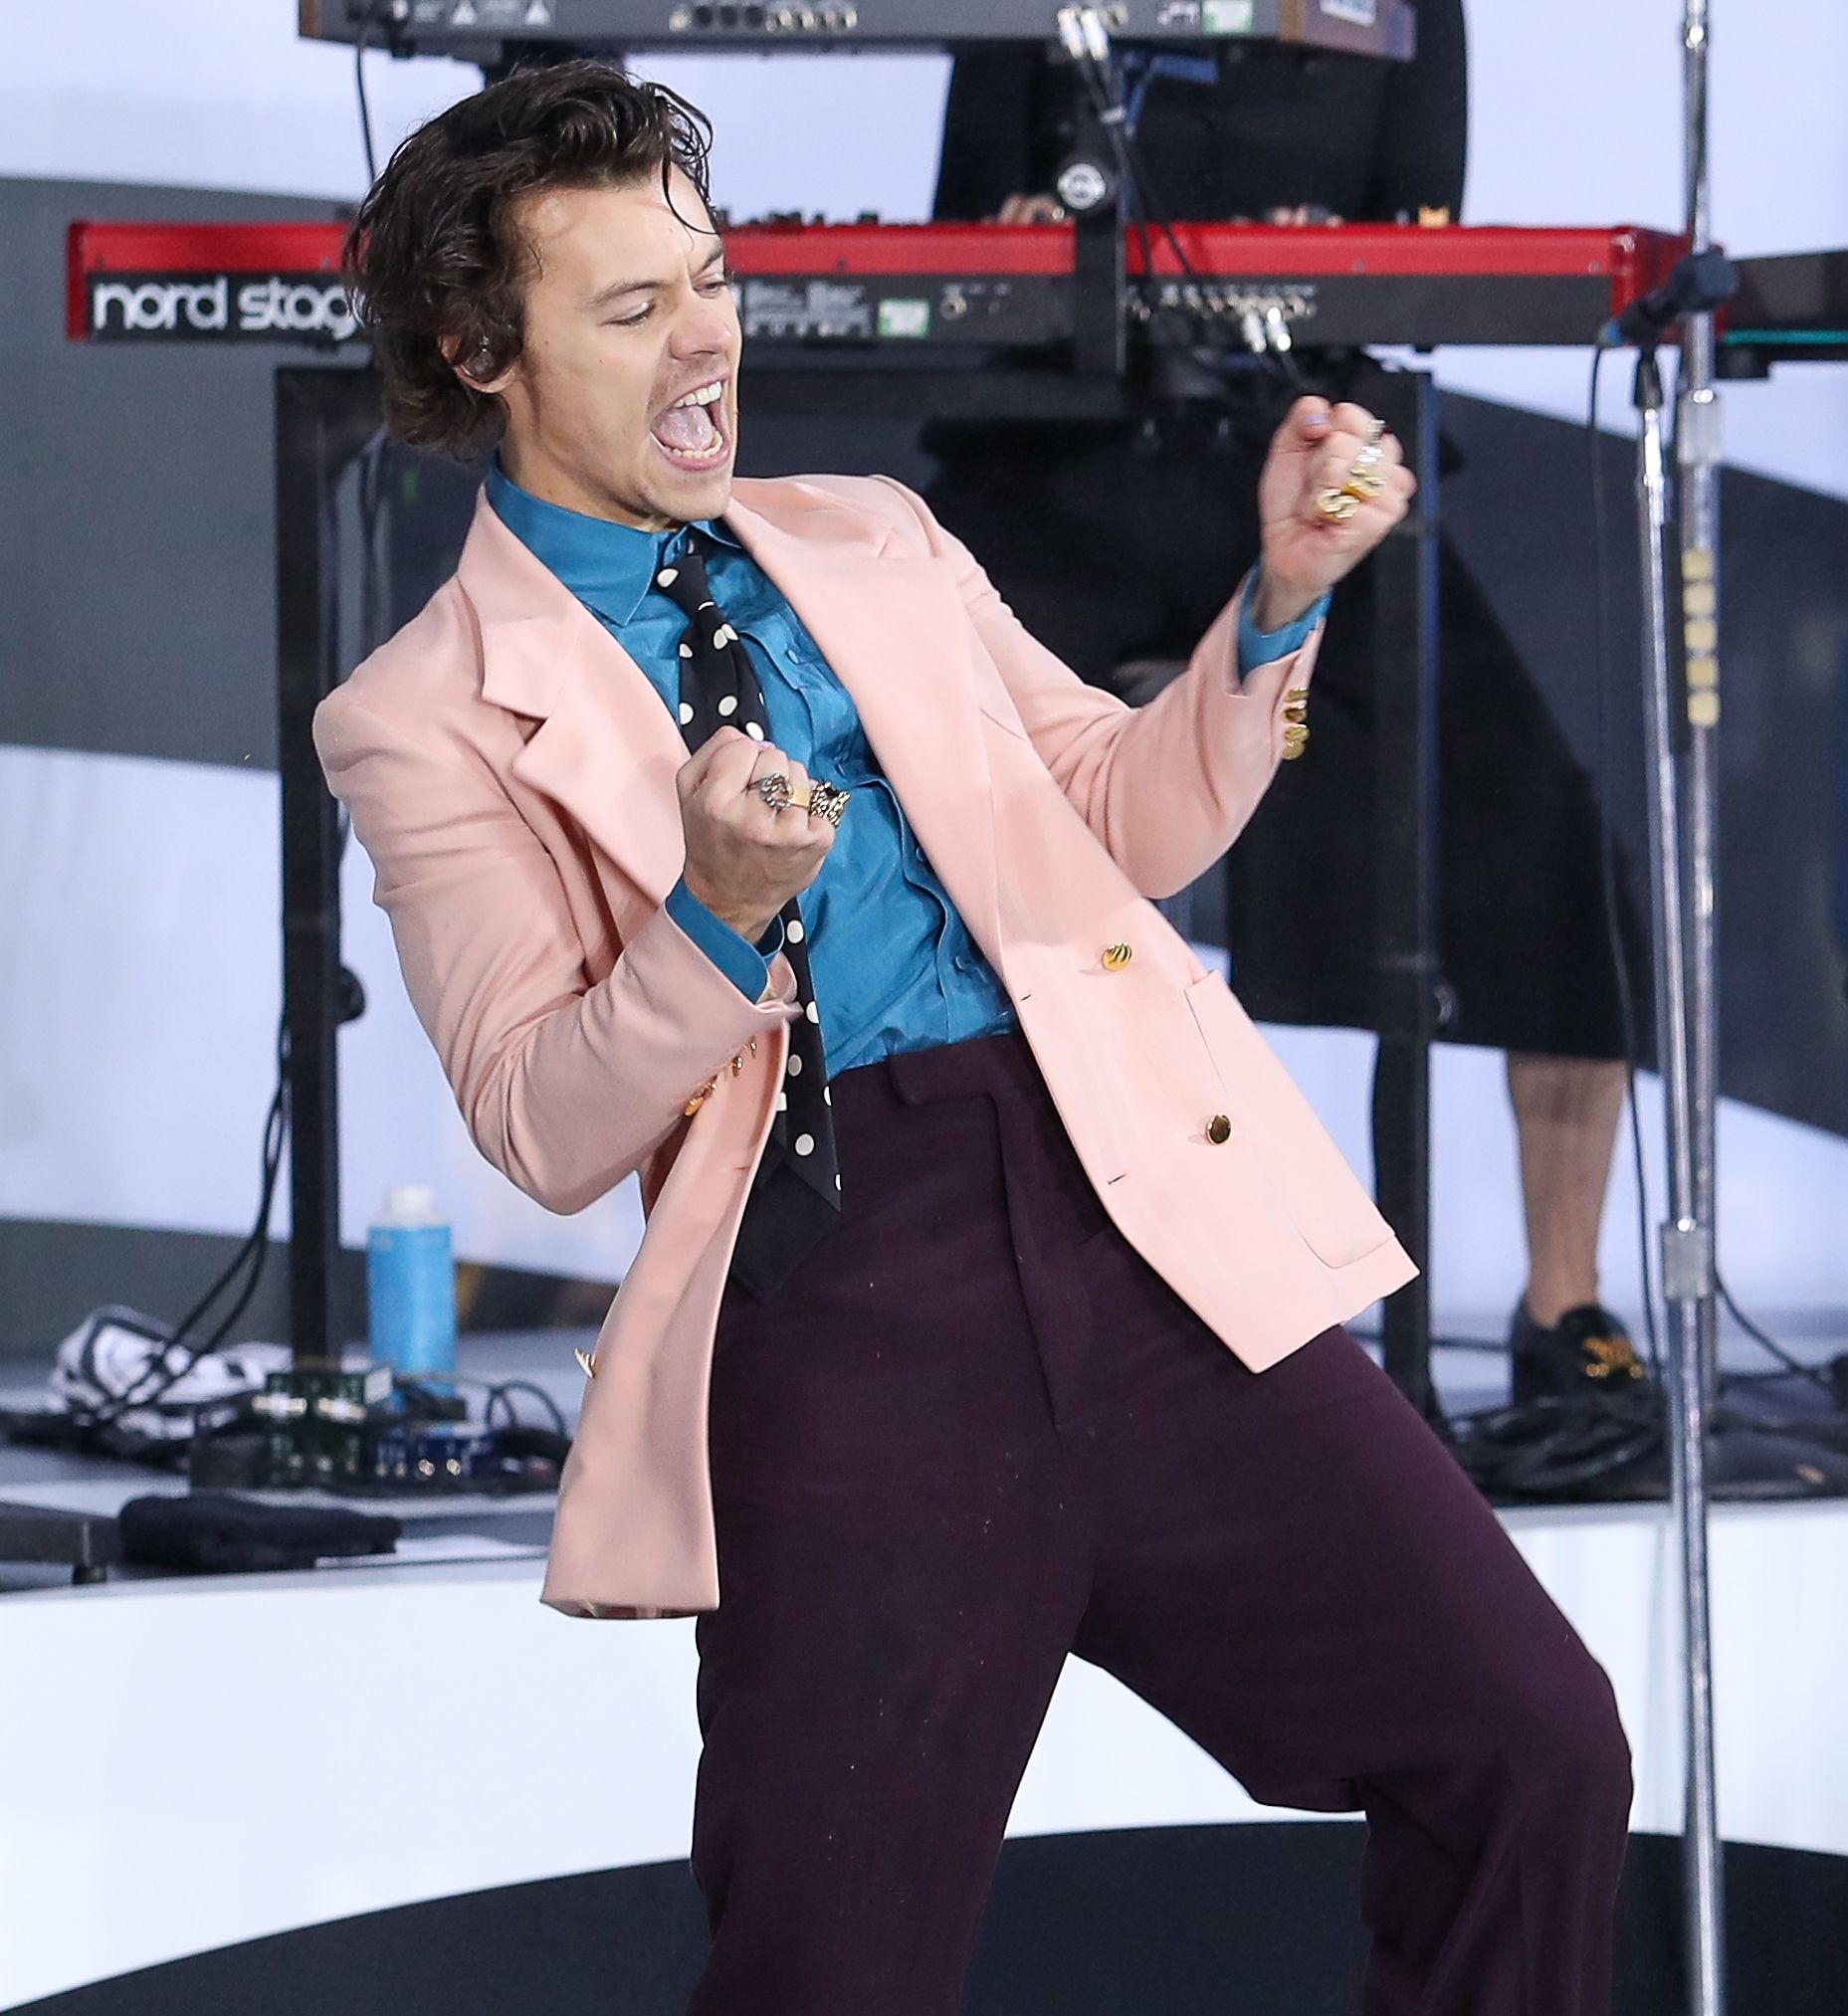 Harry Styles in a jacket on stage